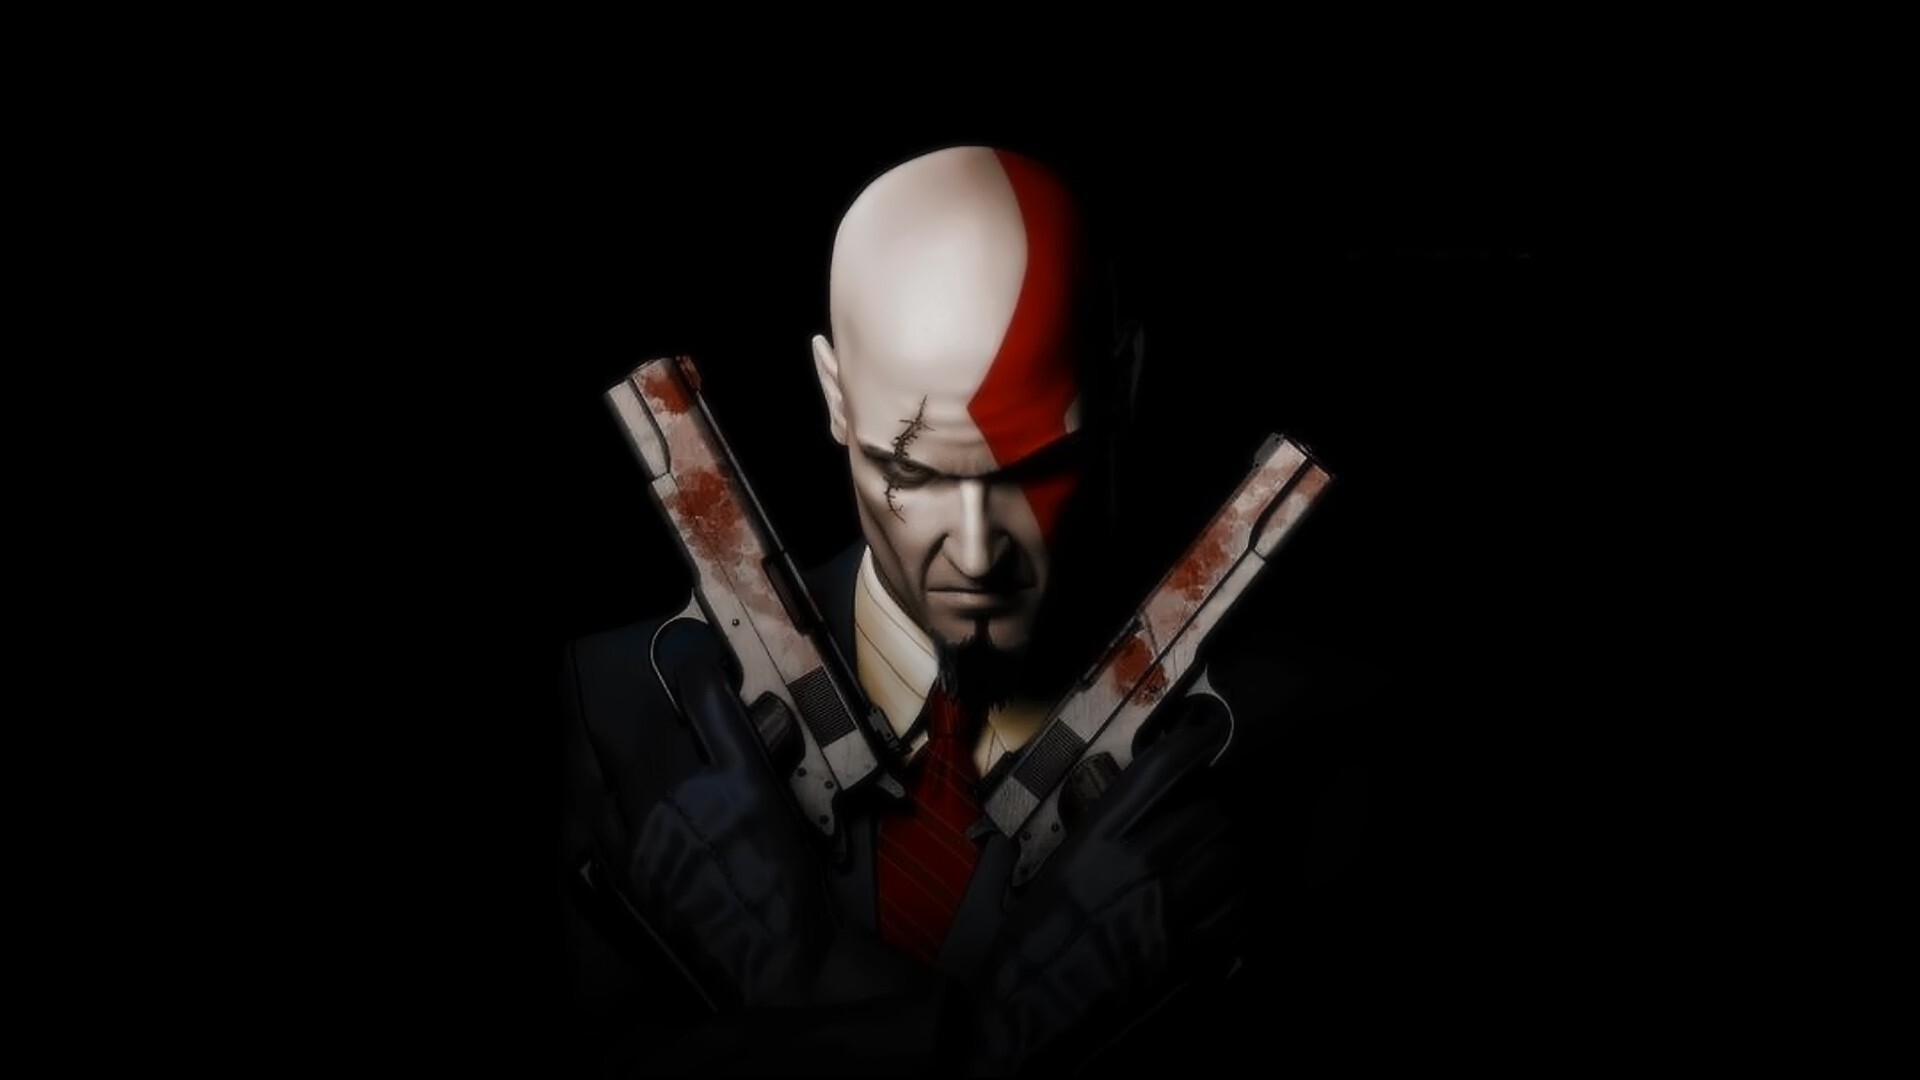 Hitman (Game): An intense spy-thriller story, Agent 47. 1920x1080 Full HD Background.